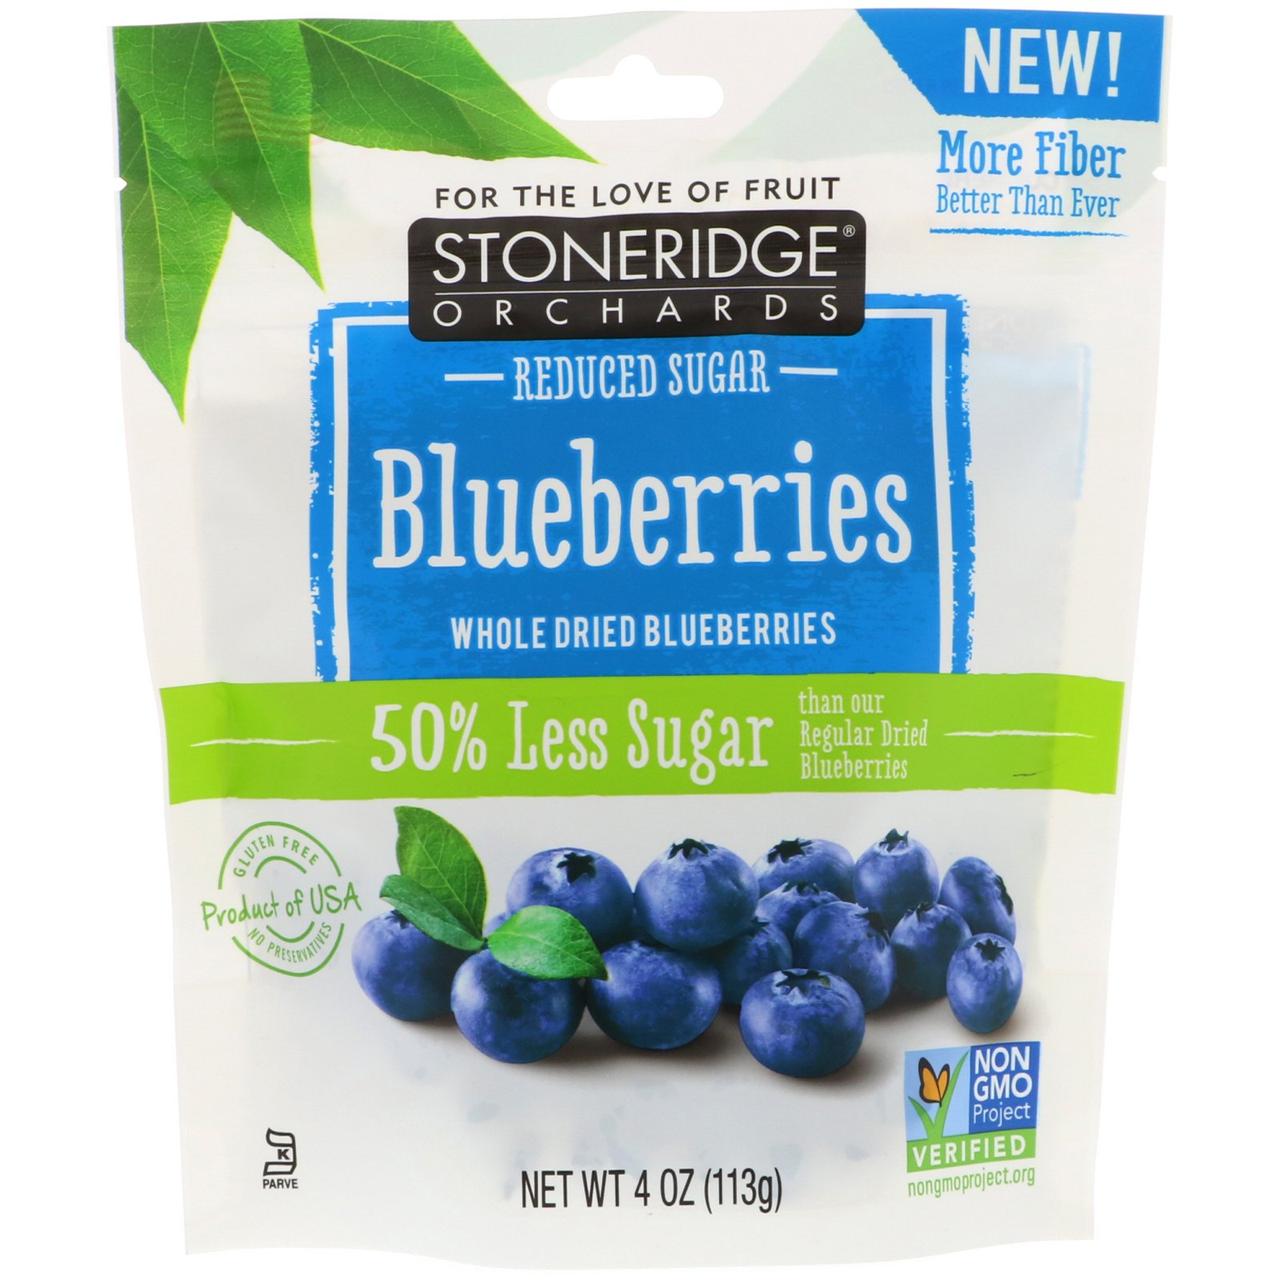 Stoneridge Orchards, Blueberries, Whole Dried Blueberries, Reduced Sugar, 4 oz (113 g)